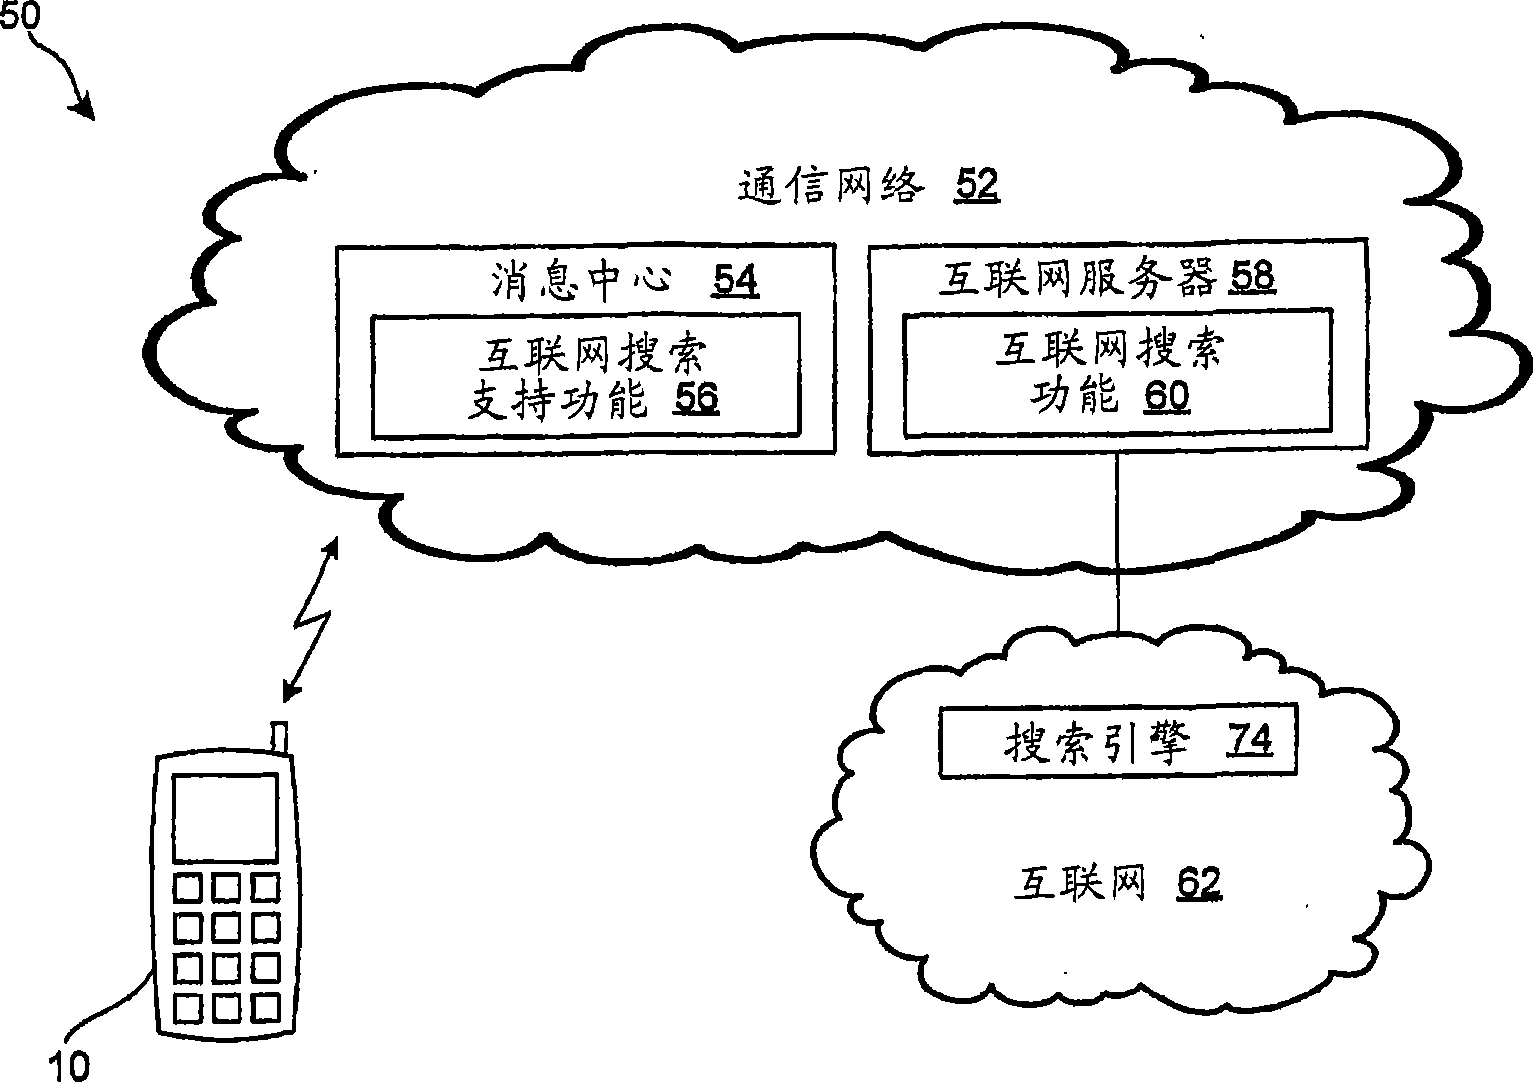 Method and system for conducting an internet search using a mobile radio terminal